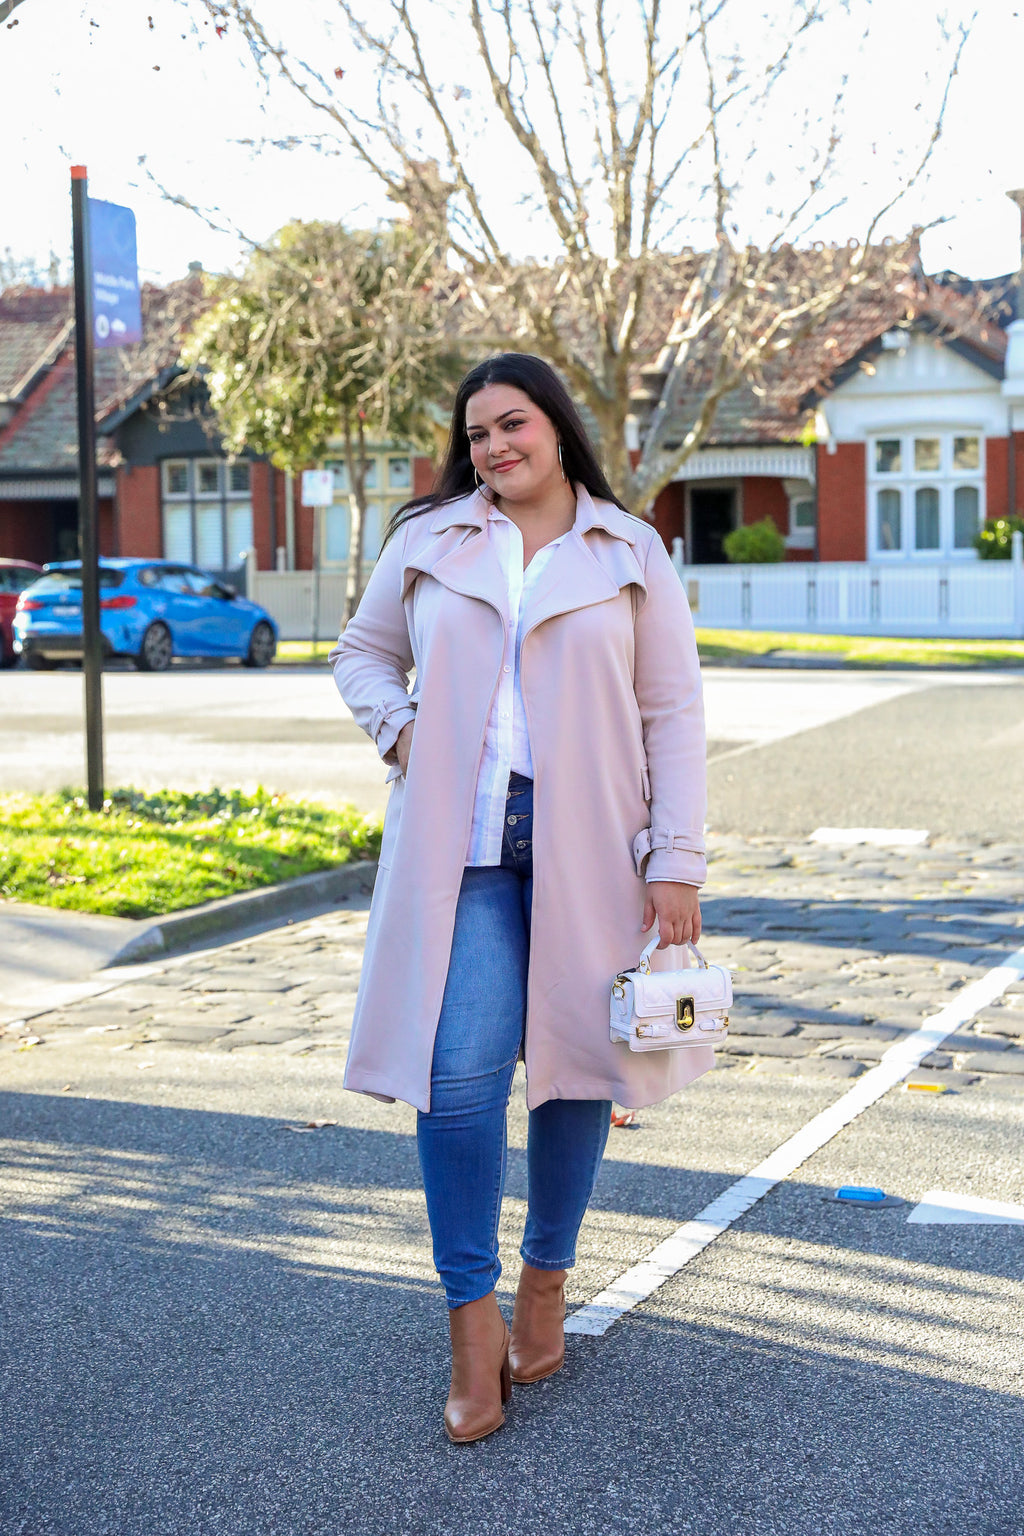 how to wear pastel jeans - how to wear pink jeans - pink jeans